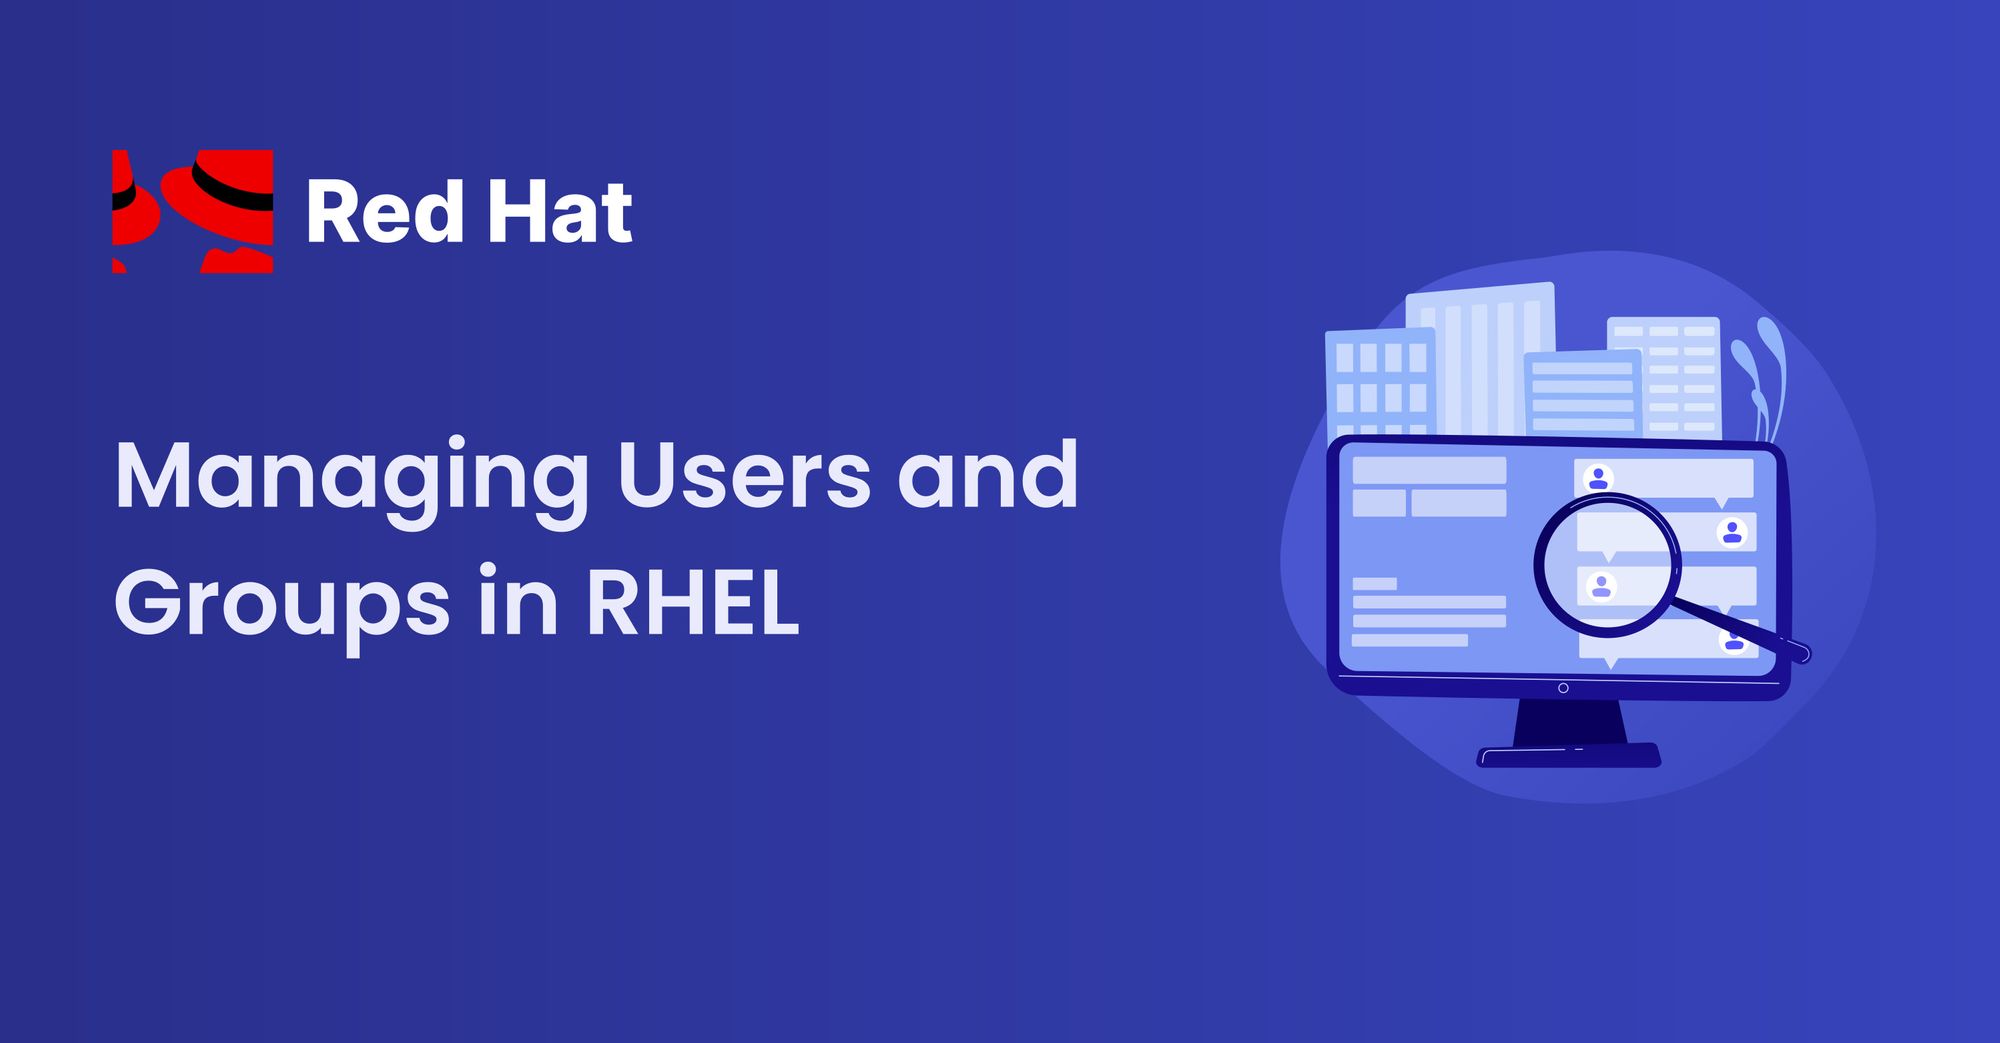 How to Manage Users and Groups in Red Hat Enterprise Linux